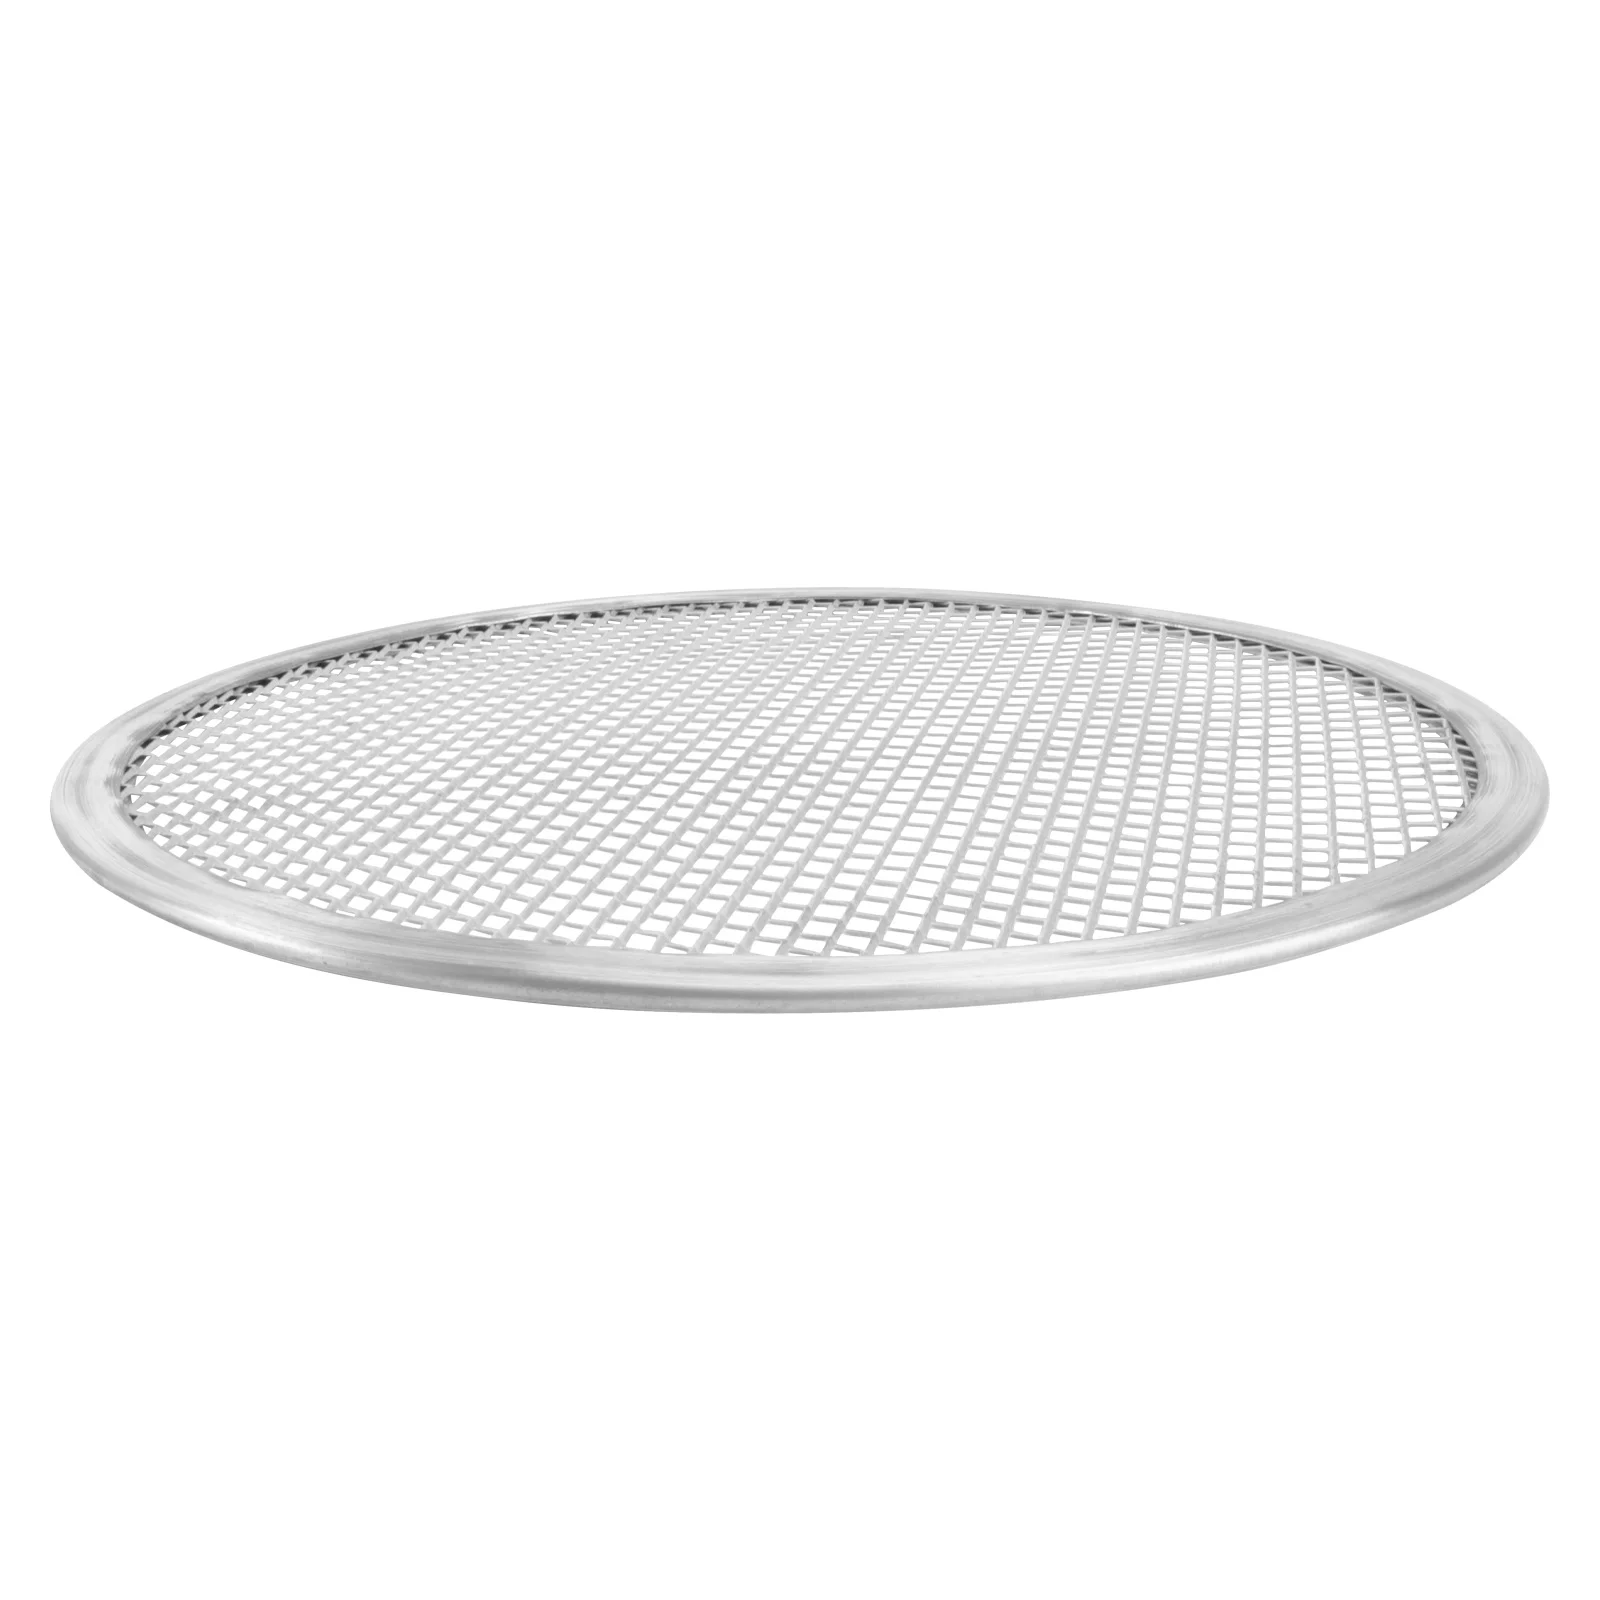 

Pizza Stone Mesh Baking Pan 16 Inches Aluminum Seamless Tray Home Kitchen Pans Restaurant Toaster Oven